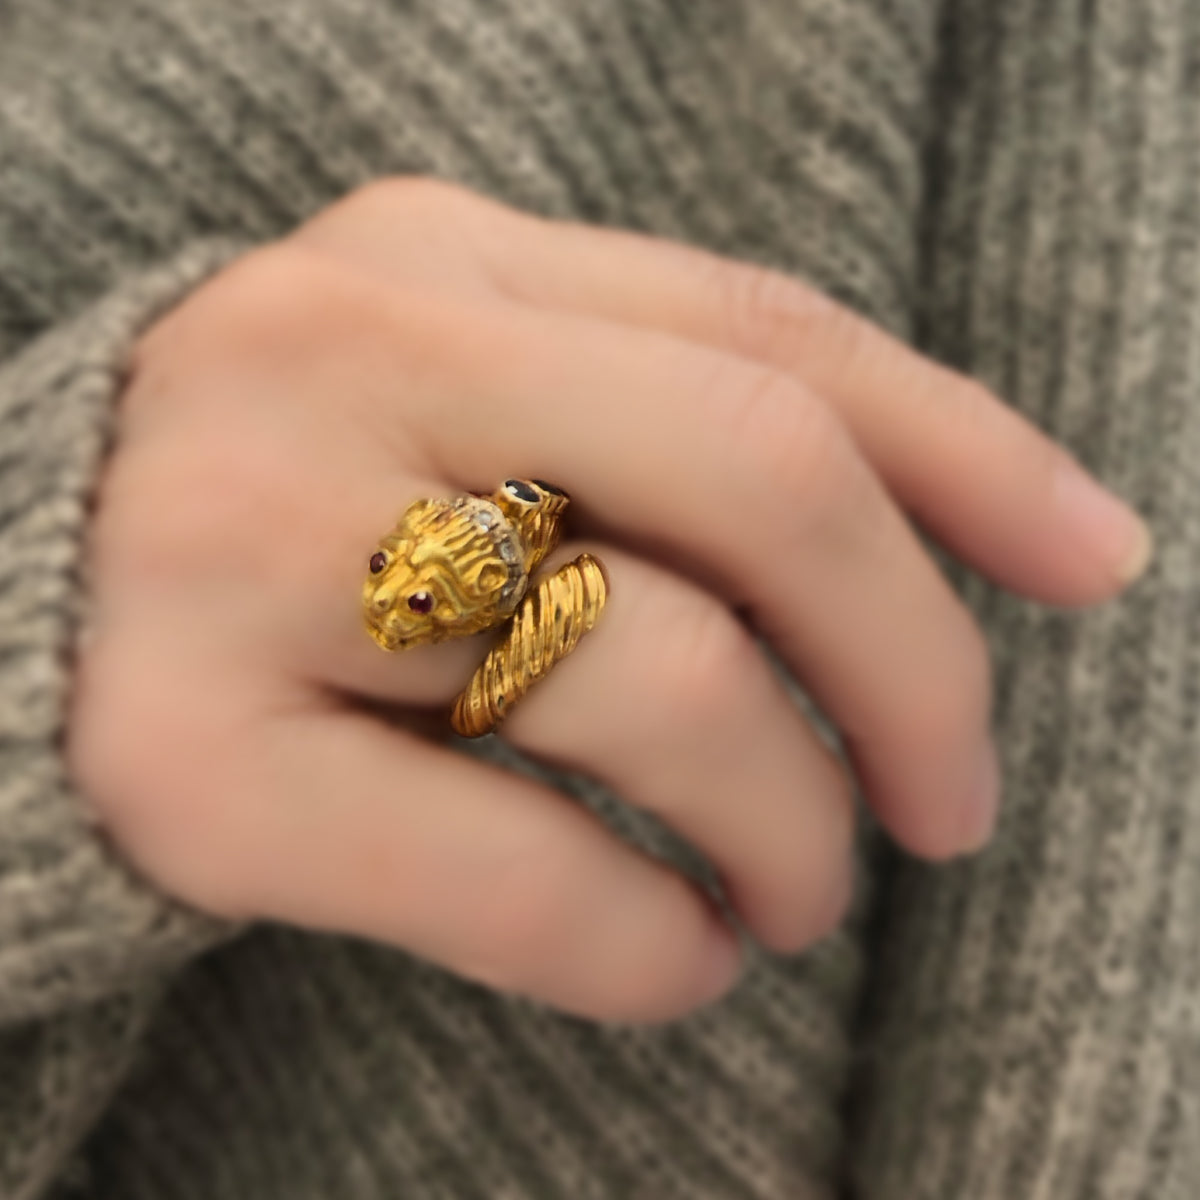 Signed Ilias Lalaounis Bypass Lion Ring in 18K